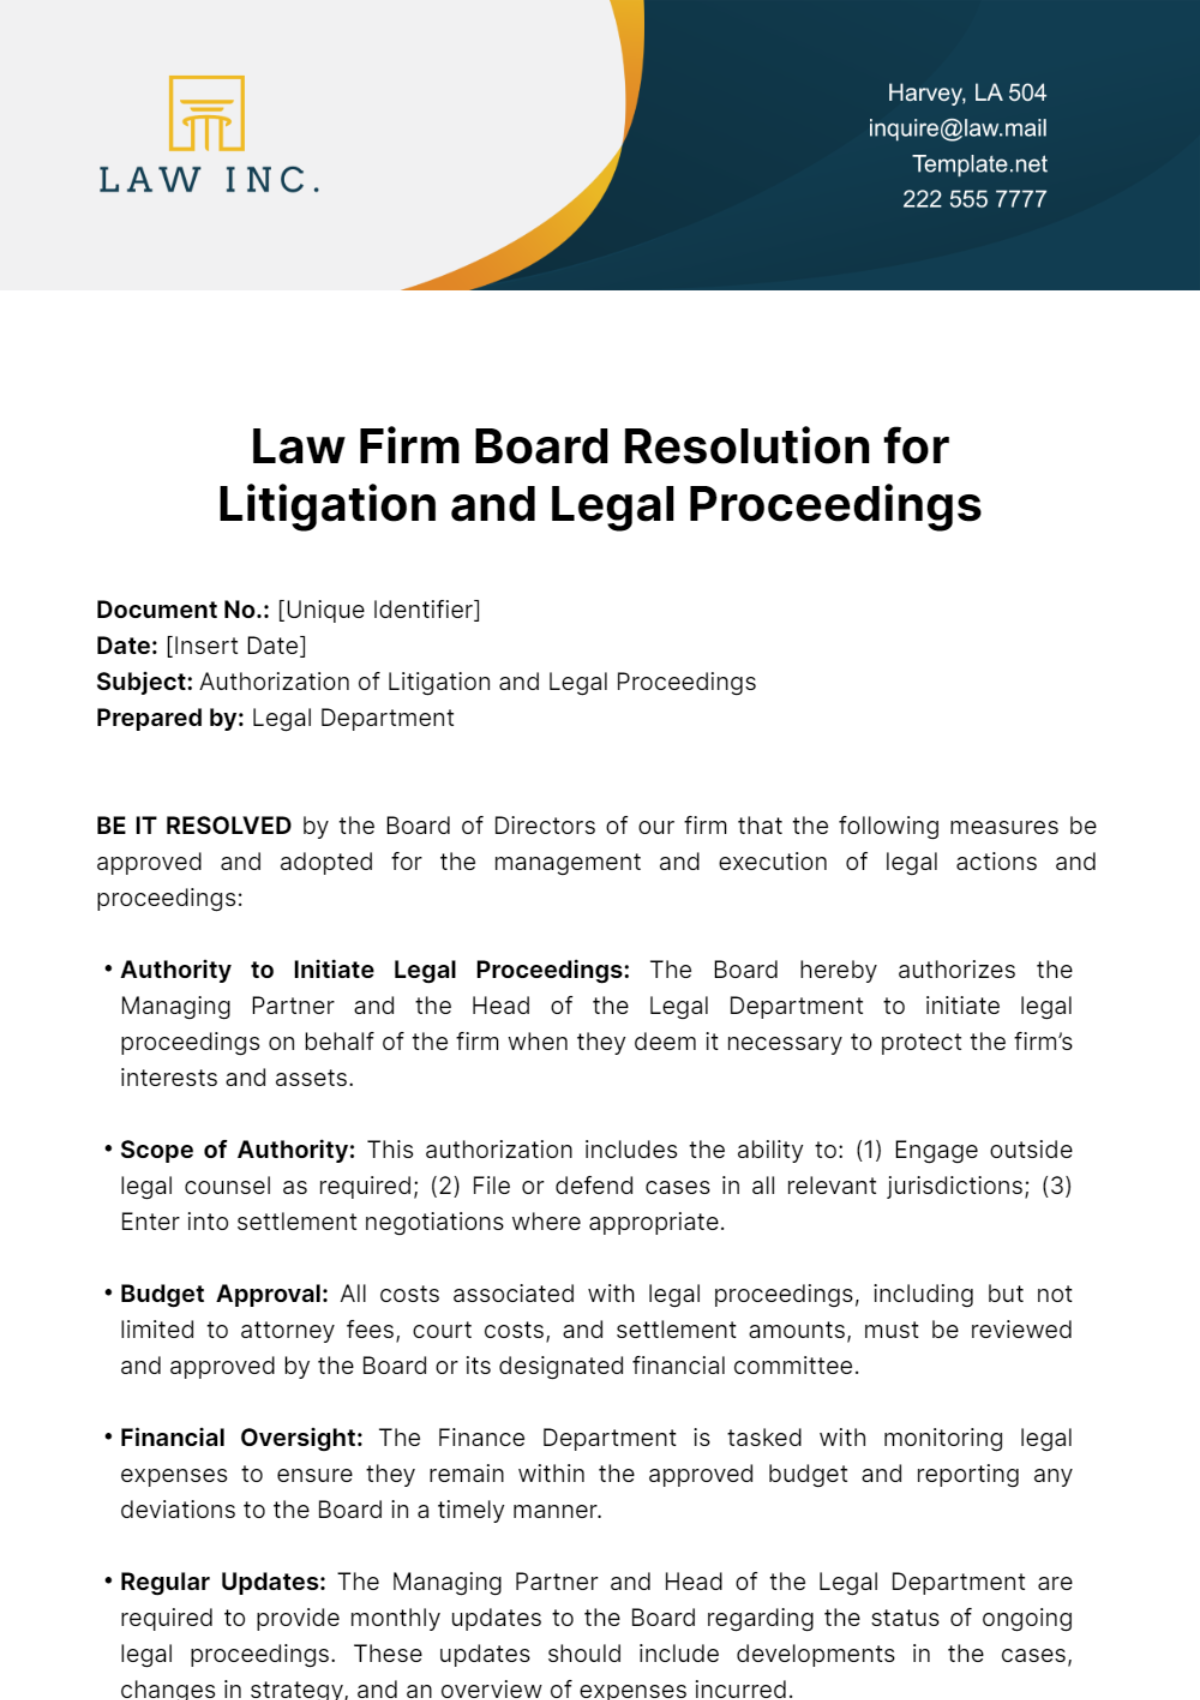 Law Firm Board Resolution for Litigation and Legal Proceedings Template